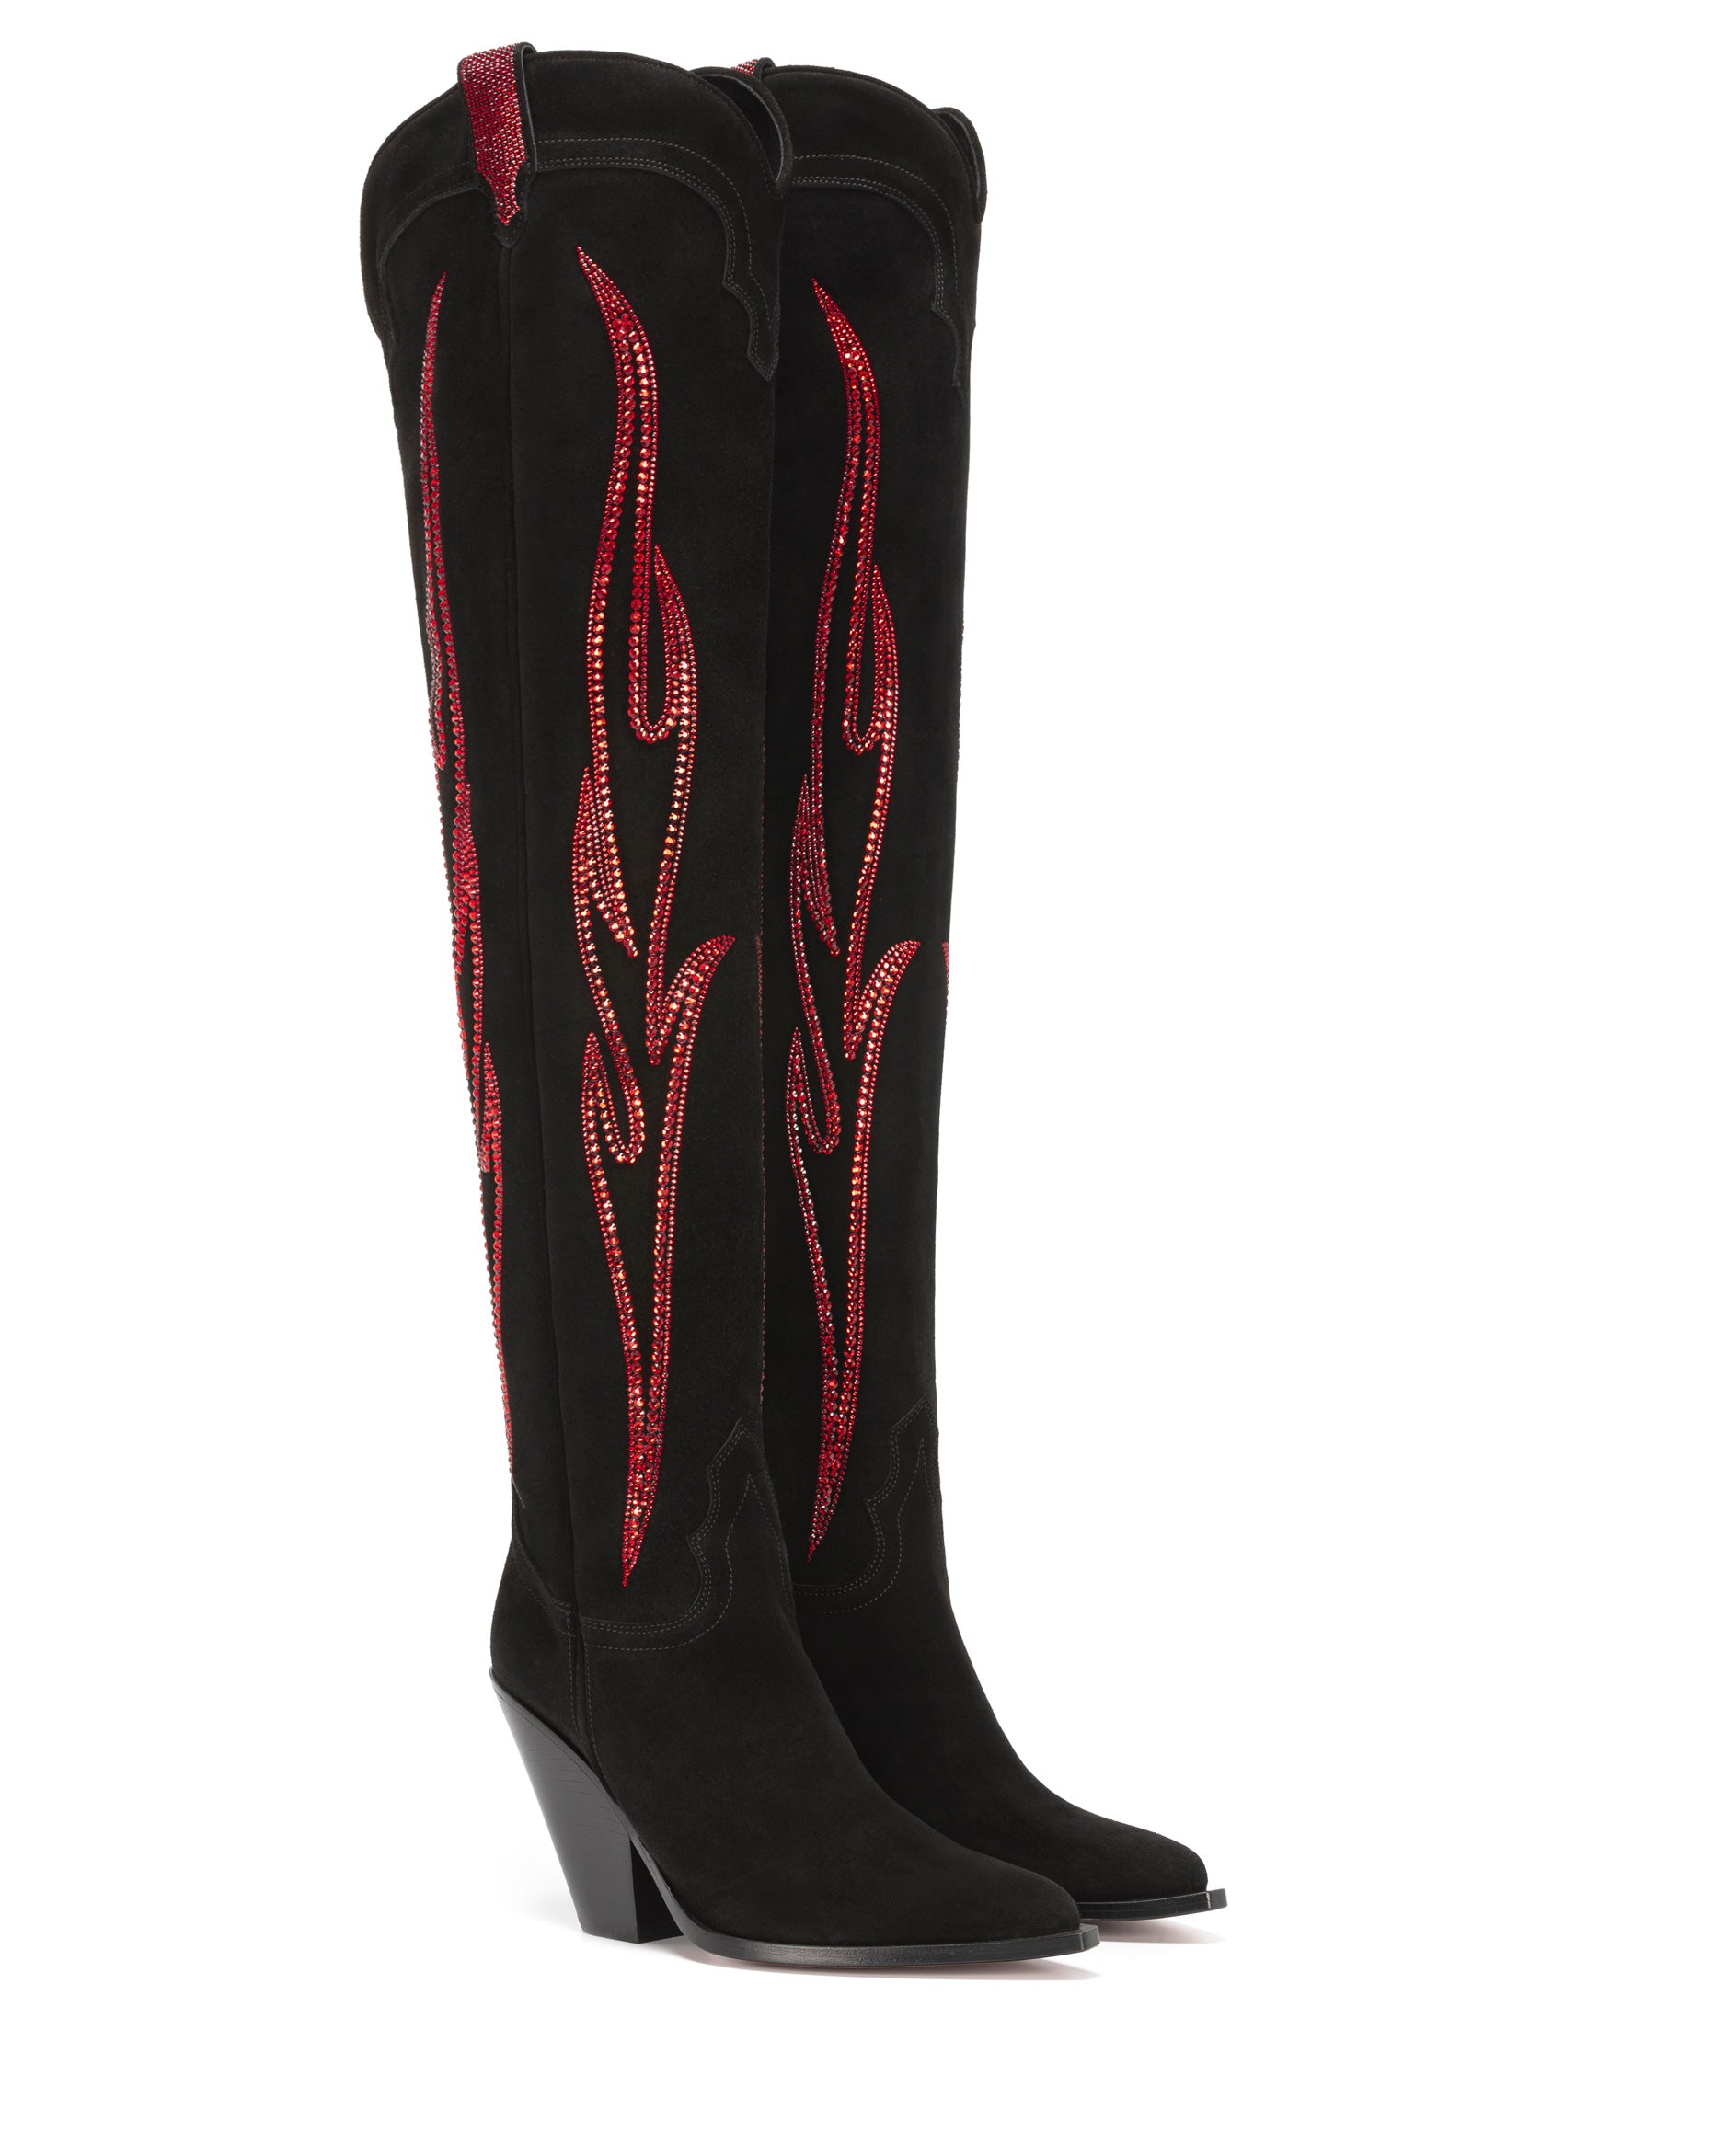     HERMOSA-90-Women_s-Over-The-Knee-Boots-in-Black-Suede-with-Red-Swarovski-Crystals_02_Front